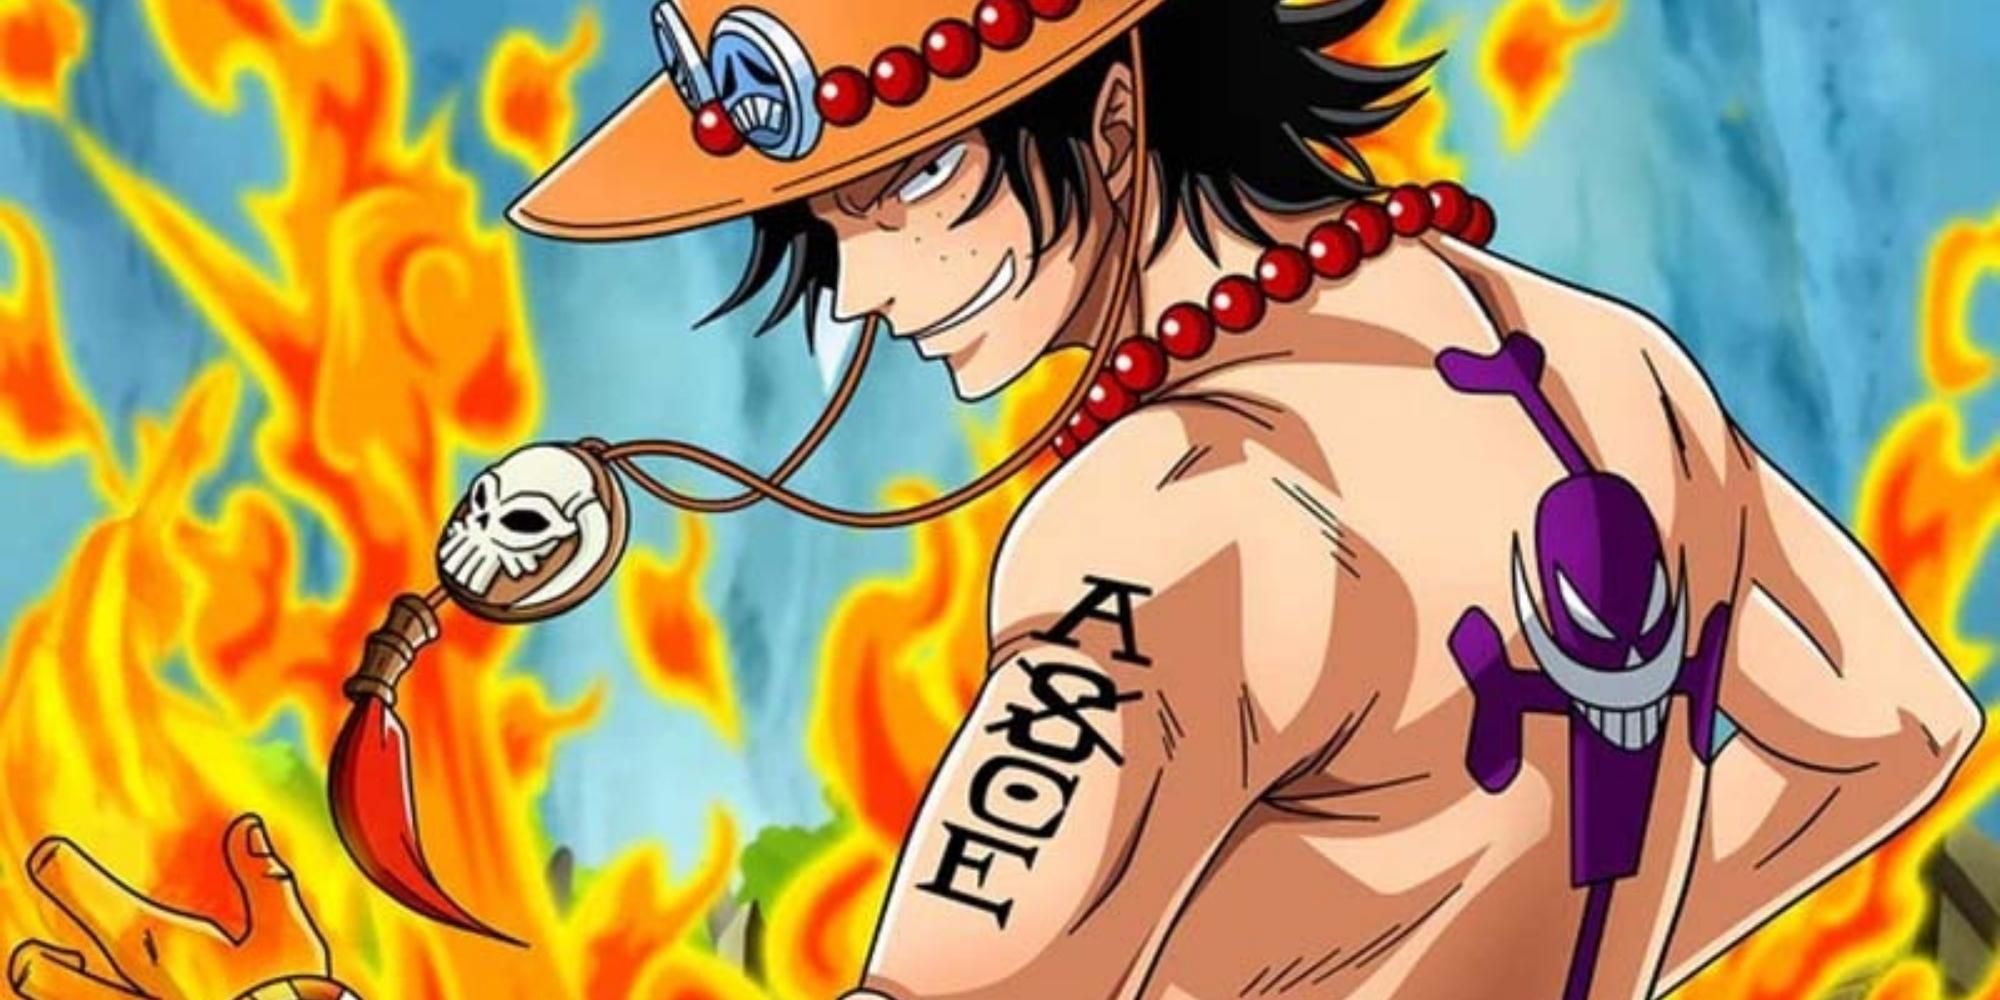 Ace with his tattoo visible in One-Piece